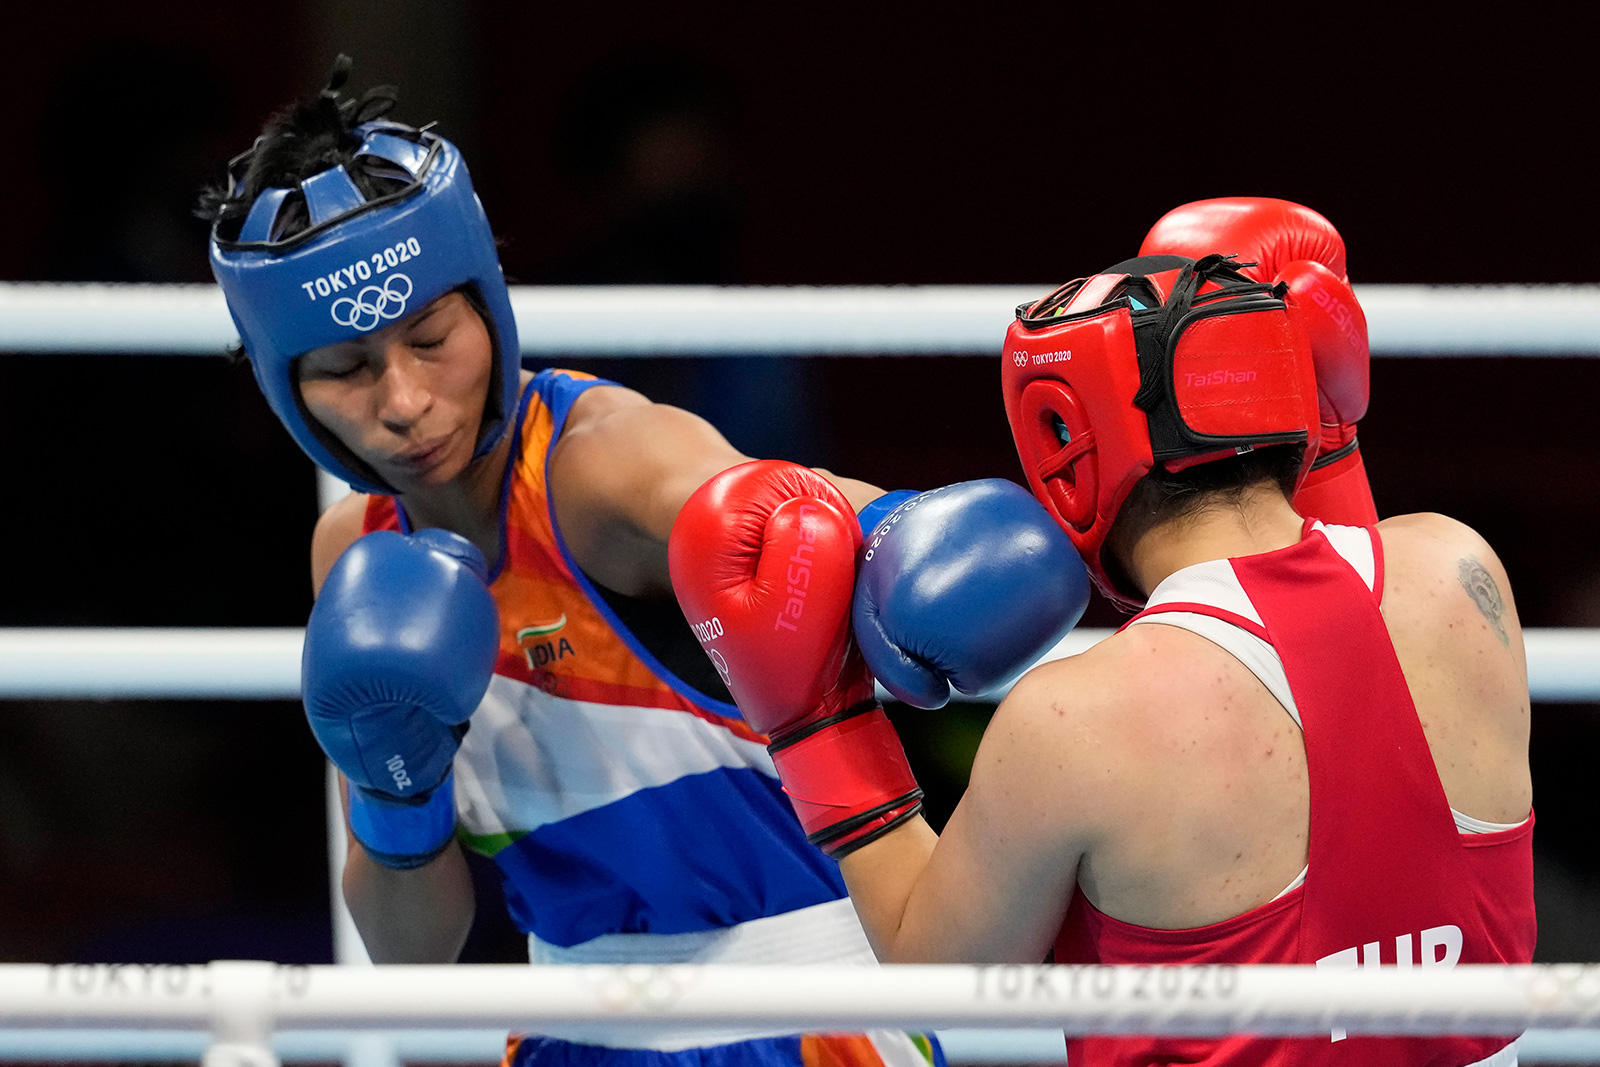 India's Lovlina Borgohain and Turkey's Busenaz Surmeneli exchange punches during their semifinal boxing match on Wednesday.